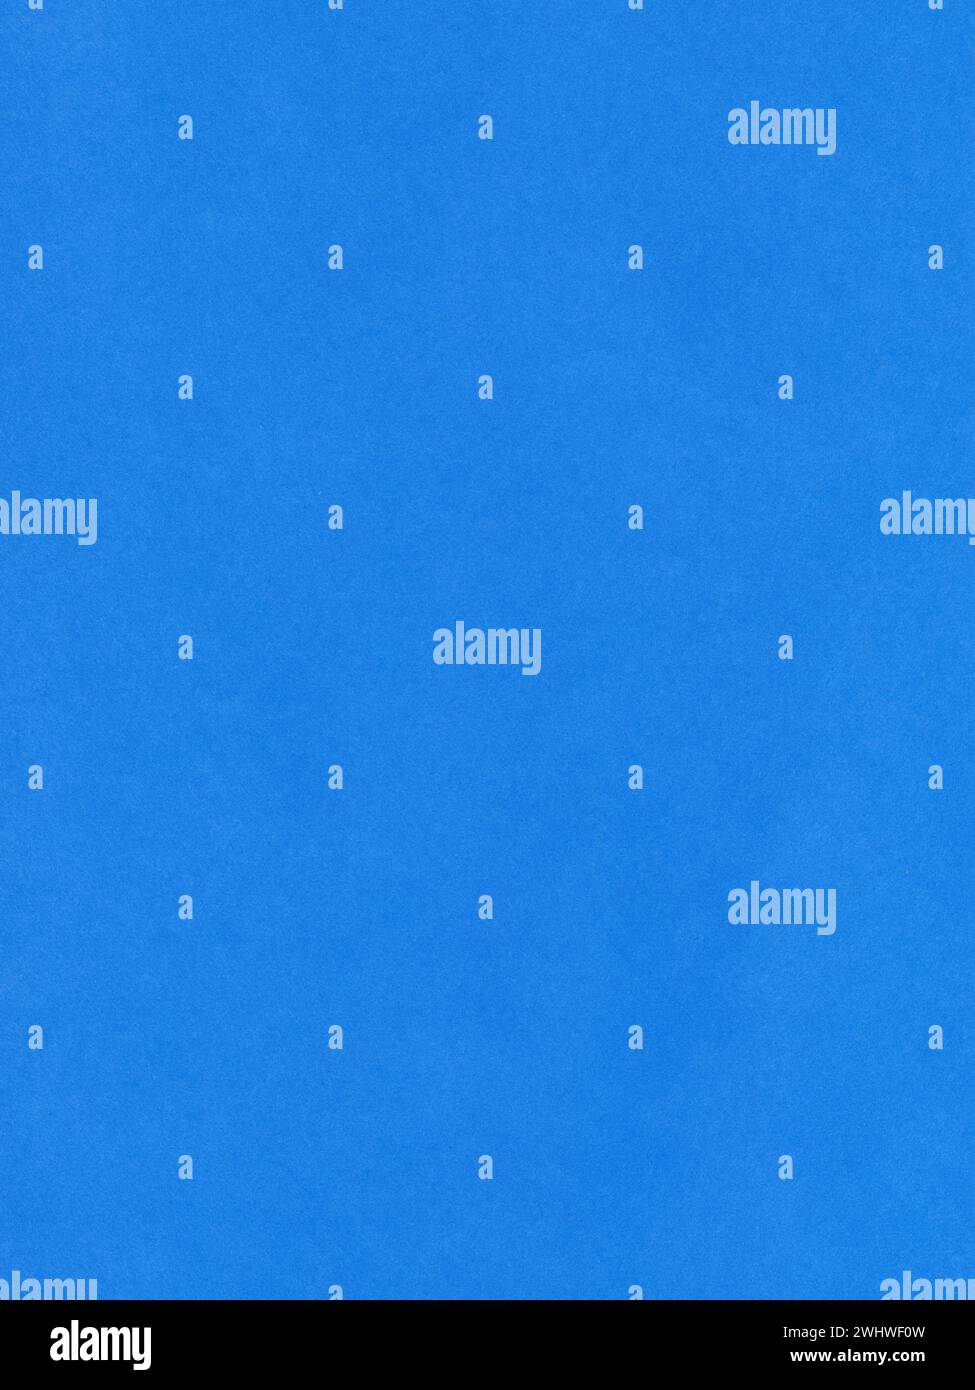 Texture of colored paper, surface of a blue sheet of paper Stock Photo